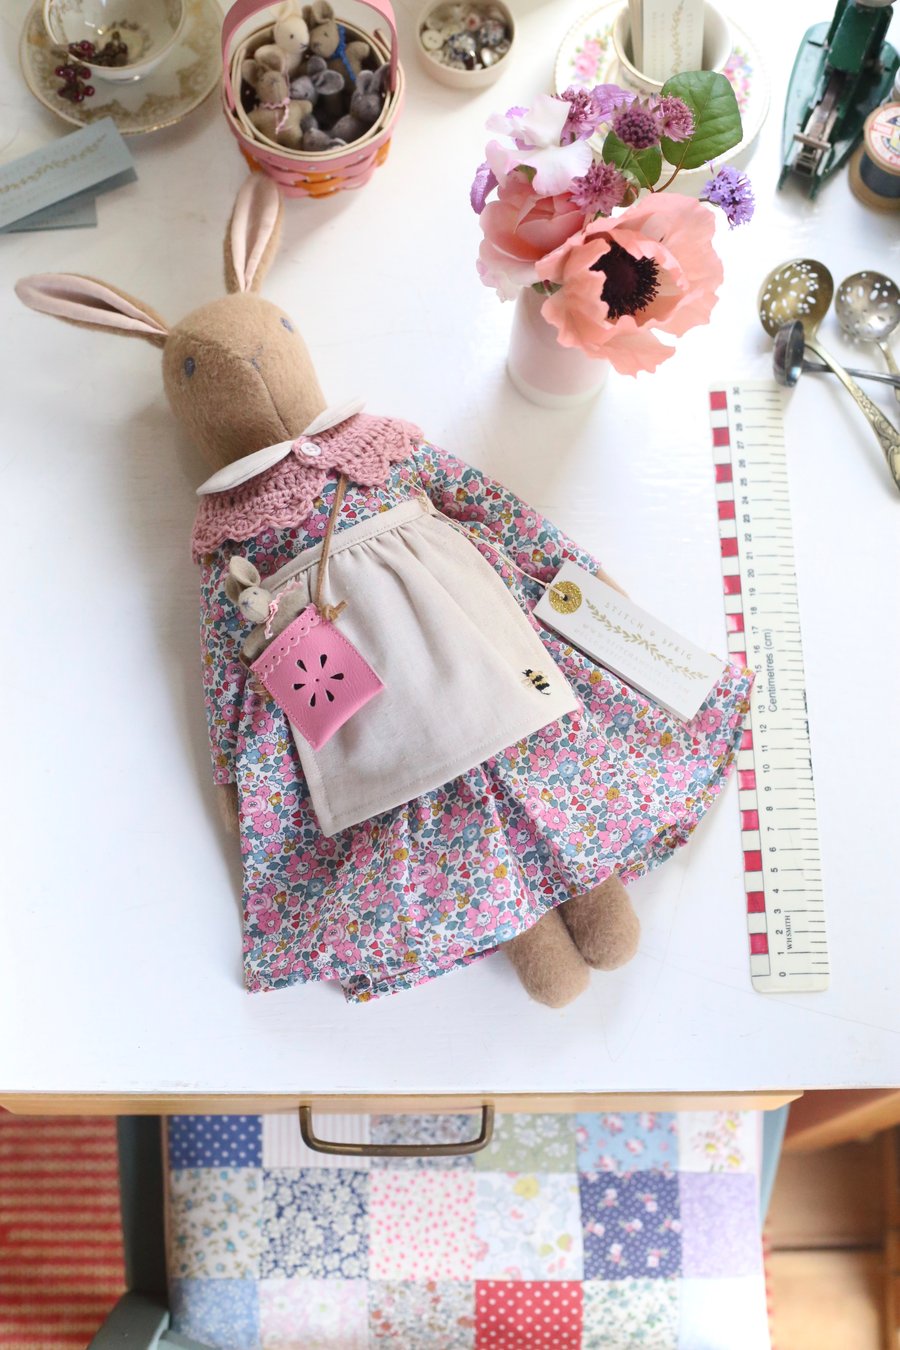 Heirloom Liberty Bunny - Betsy Ann with Bumble Bee 